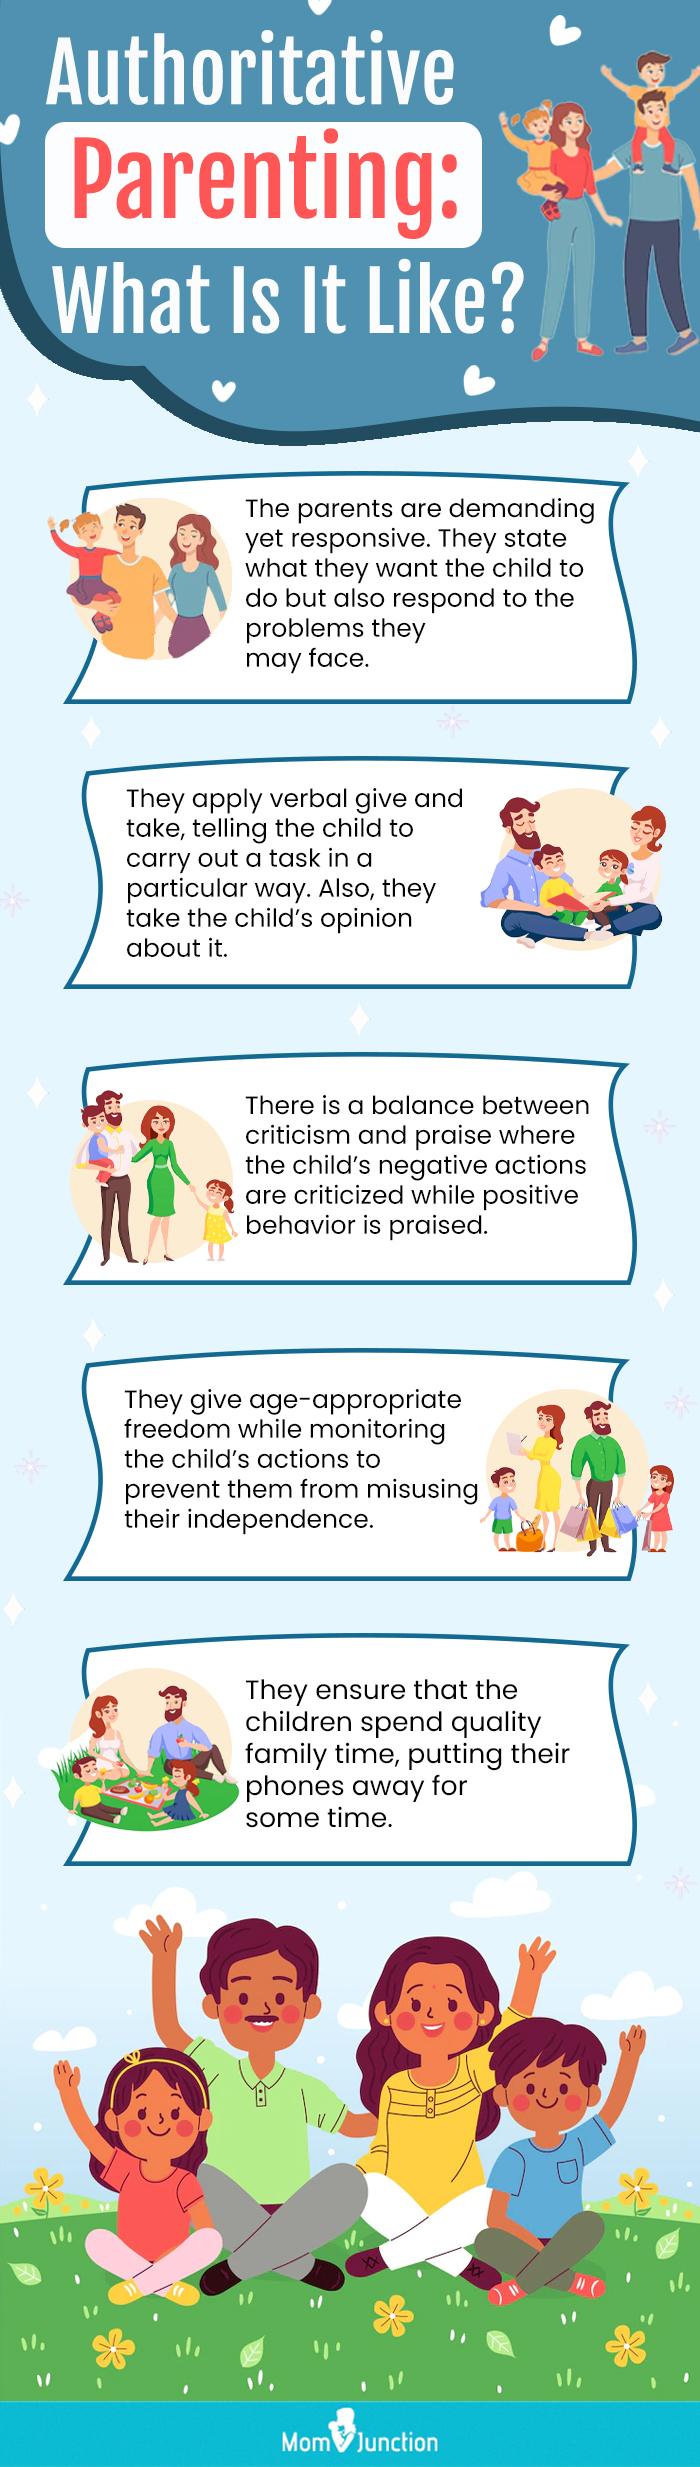 Authoritative Parenting: Creating a Safe and Supportive Environment